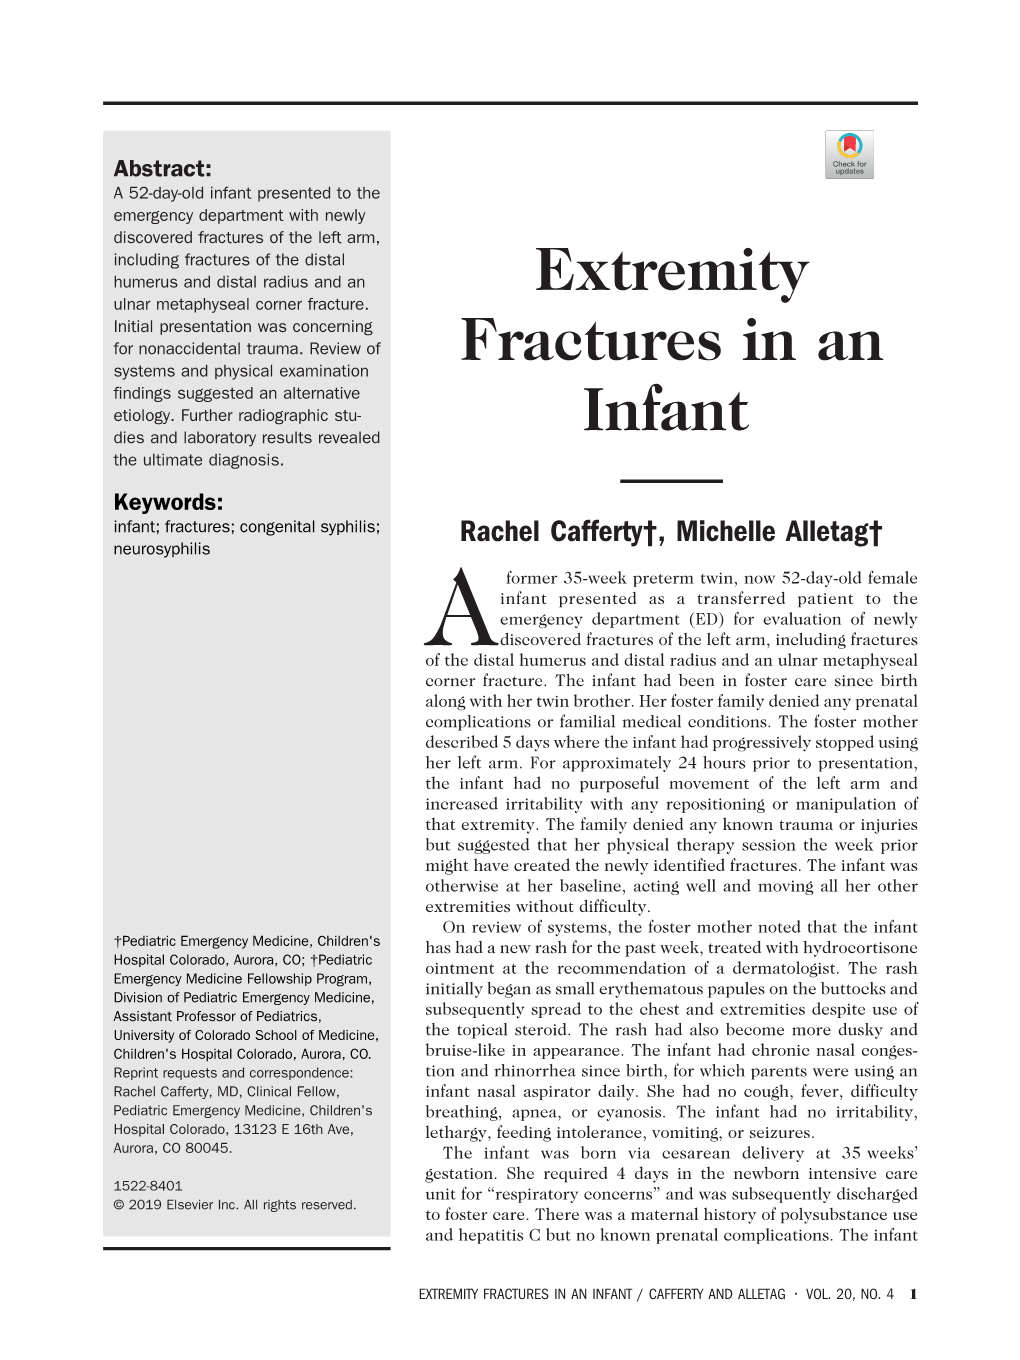 Extremity Fractures in an Infant / Cafferty and Alletag • Vol